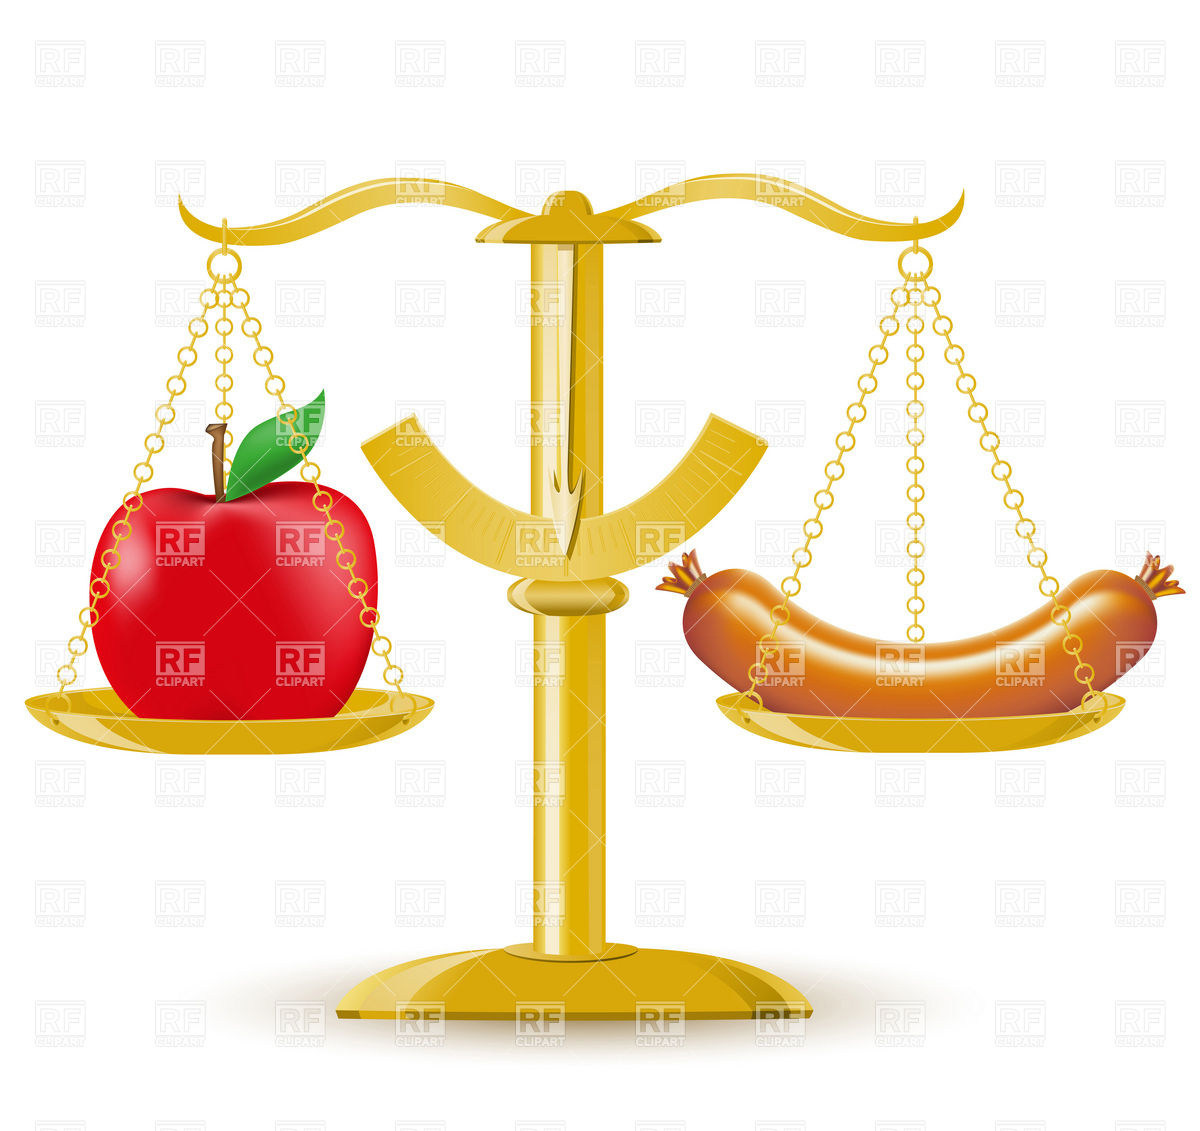 Clipart Catalog Food And Beverages Comparison Of Food On Scales Diet    